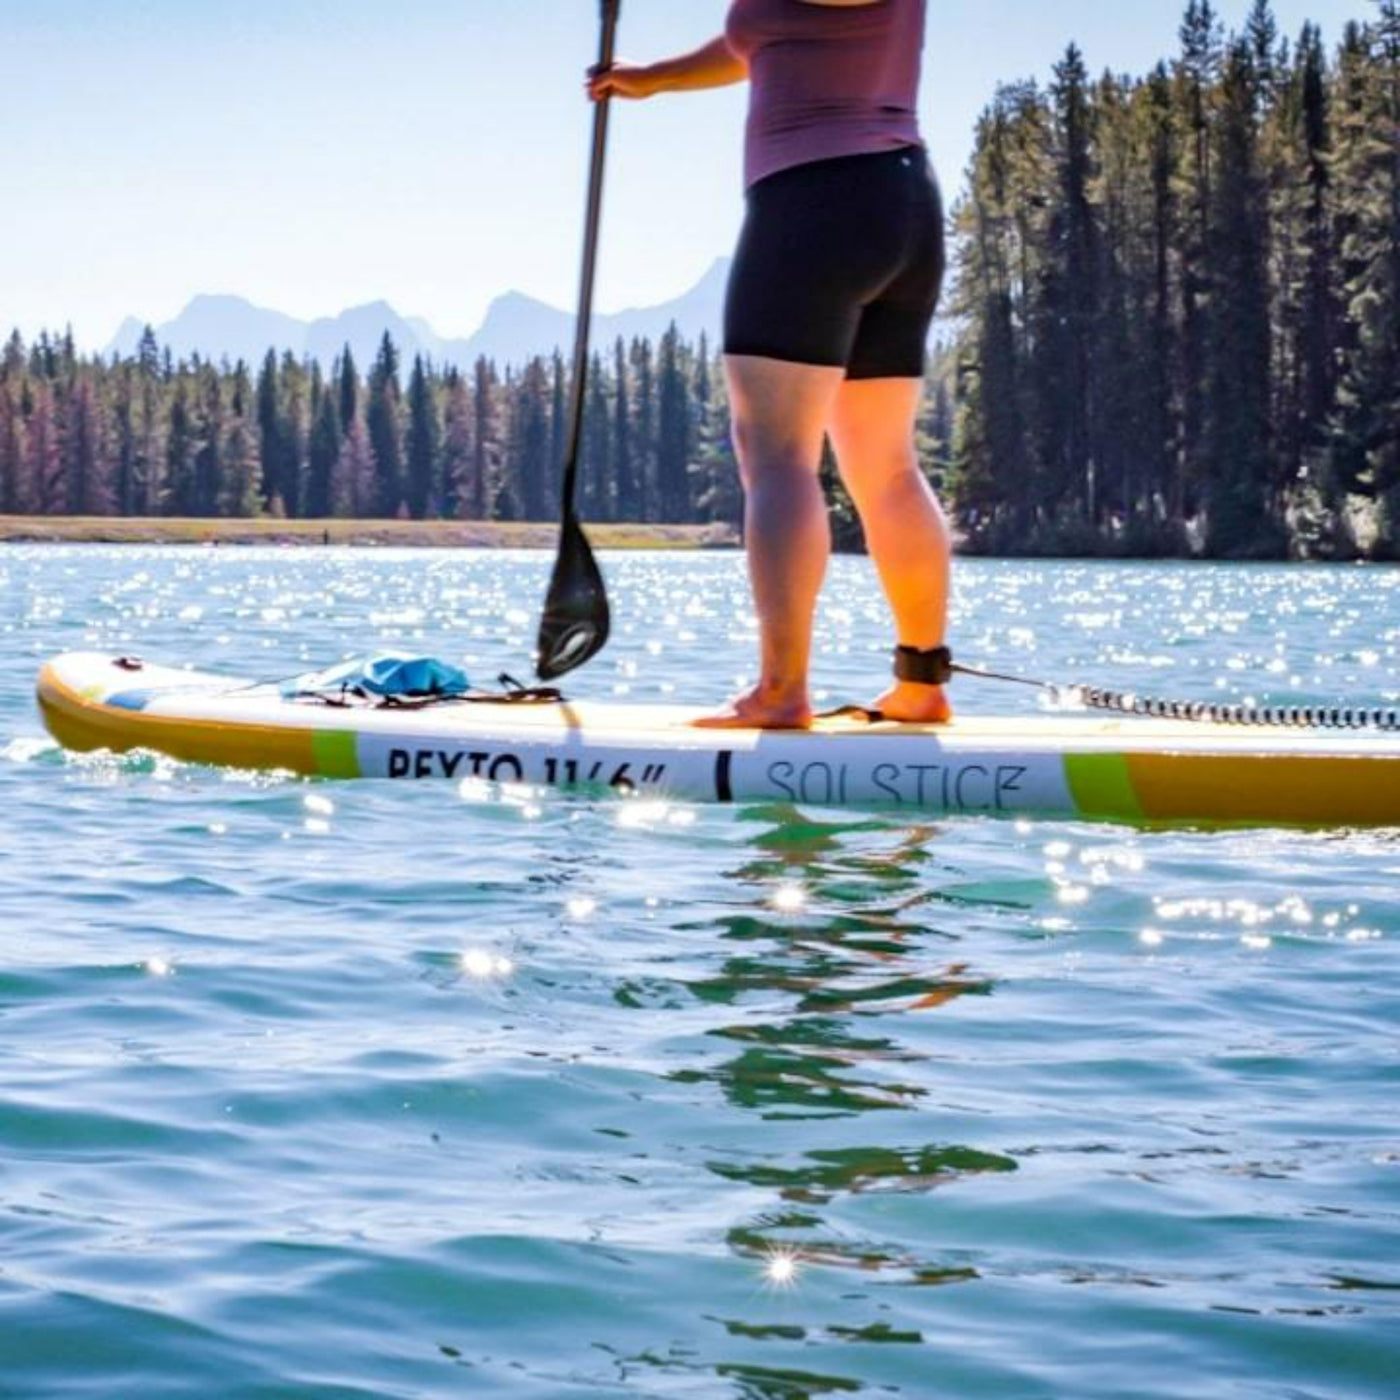 Solstice Paddle Boards Peyto Inflatable Stand up Paddle Board